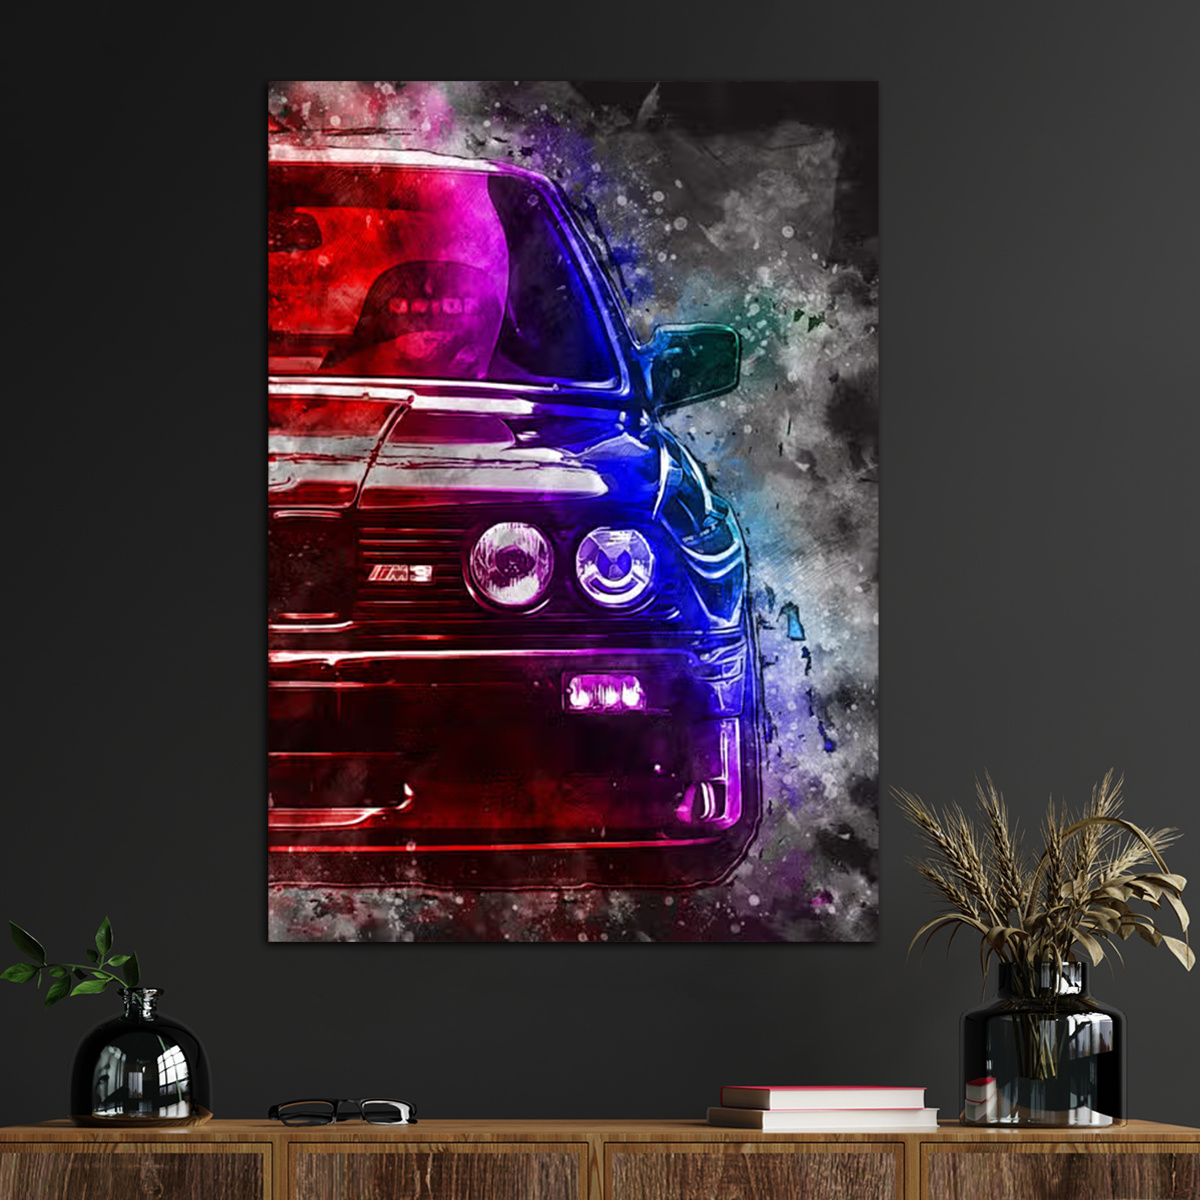 

1pc Car Poster Canvas Wall Art For Home Decor, Car Lovers And Car Enthusiasts Poster Wall Decor Roadster Canvas Prints For Living Room Bedroom Kitchen Office Cafe Decor, Perfect Gift And Decoration